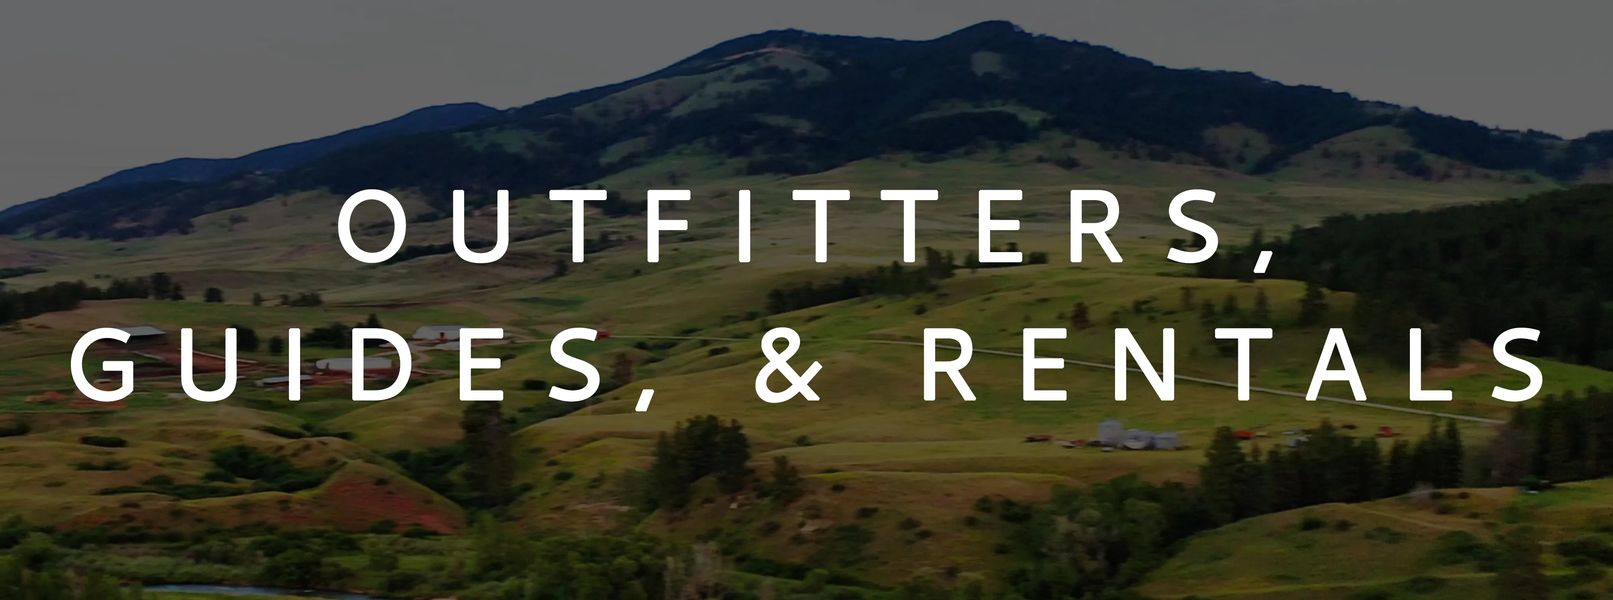 Outfitters, Guides, and Rental Services in Central Montana